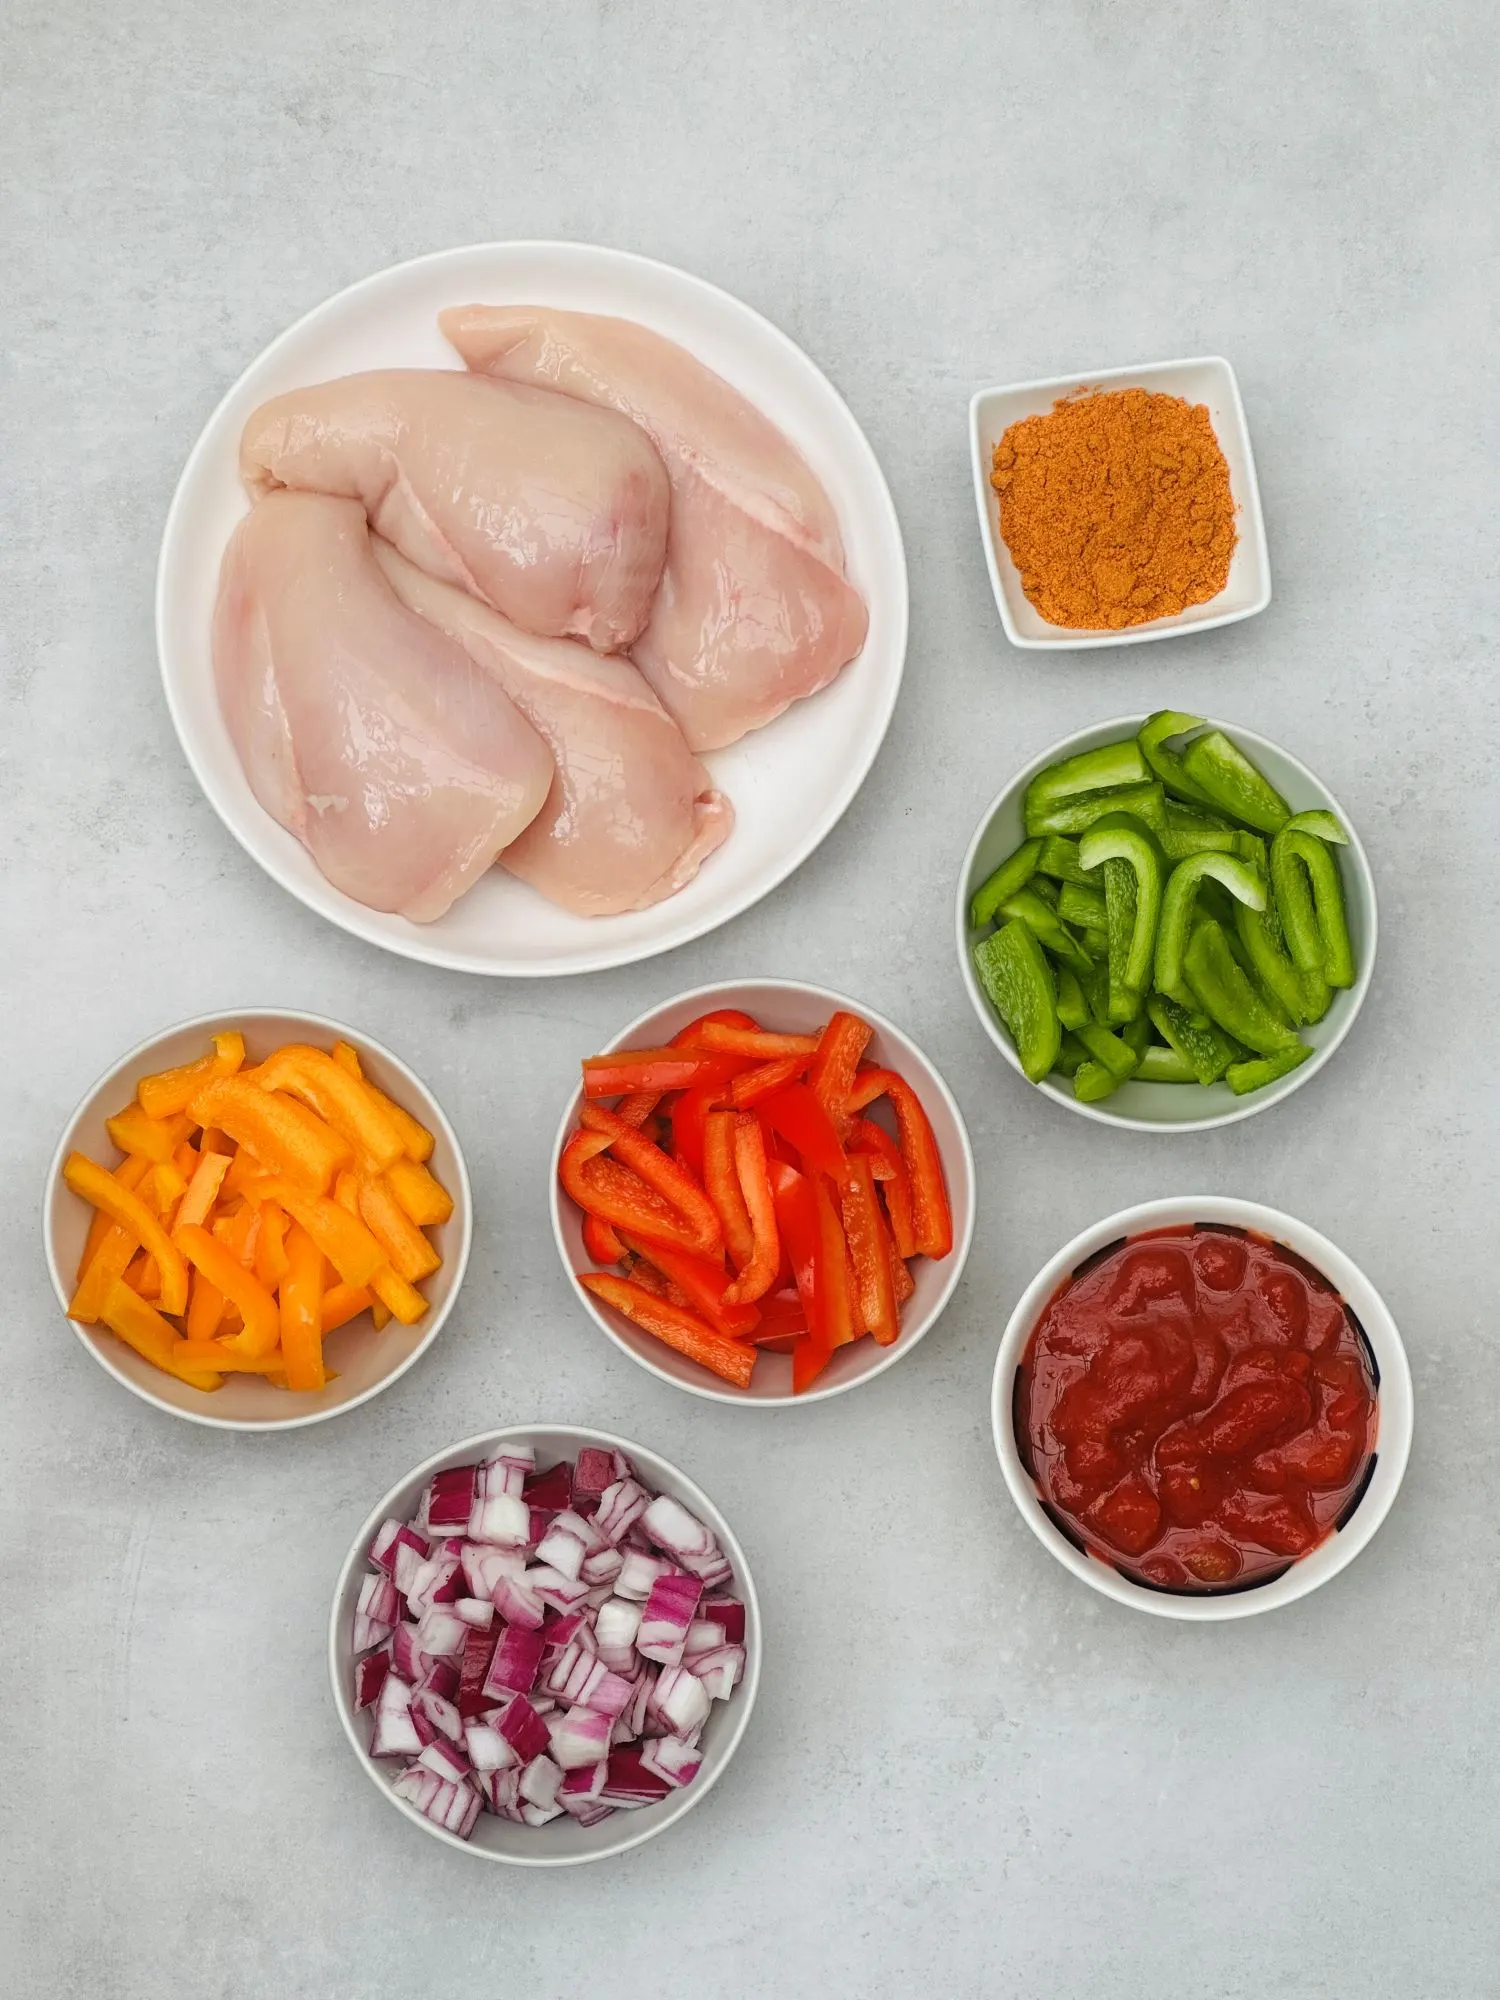 ingredients for slow cooker chicken fajitas: 4 chicken breasts, fajita spice mix, chopped orange, red and green peppers, chopped red onions and chopped tomatoes